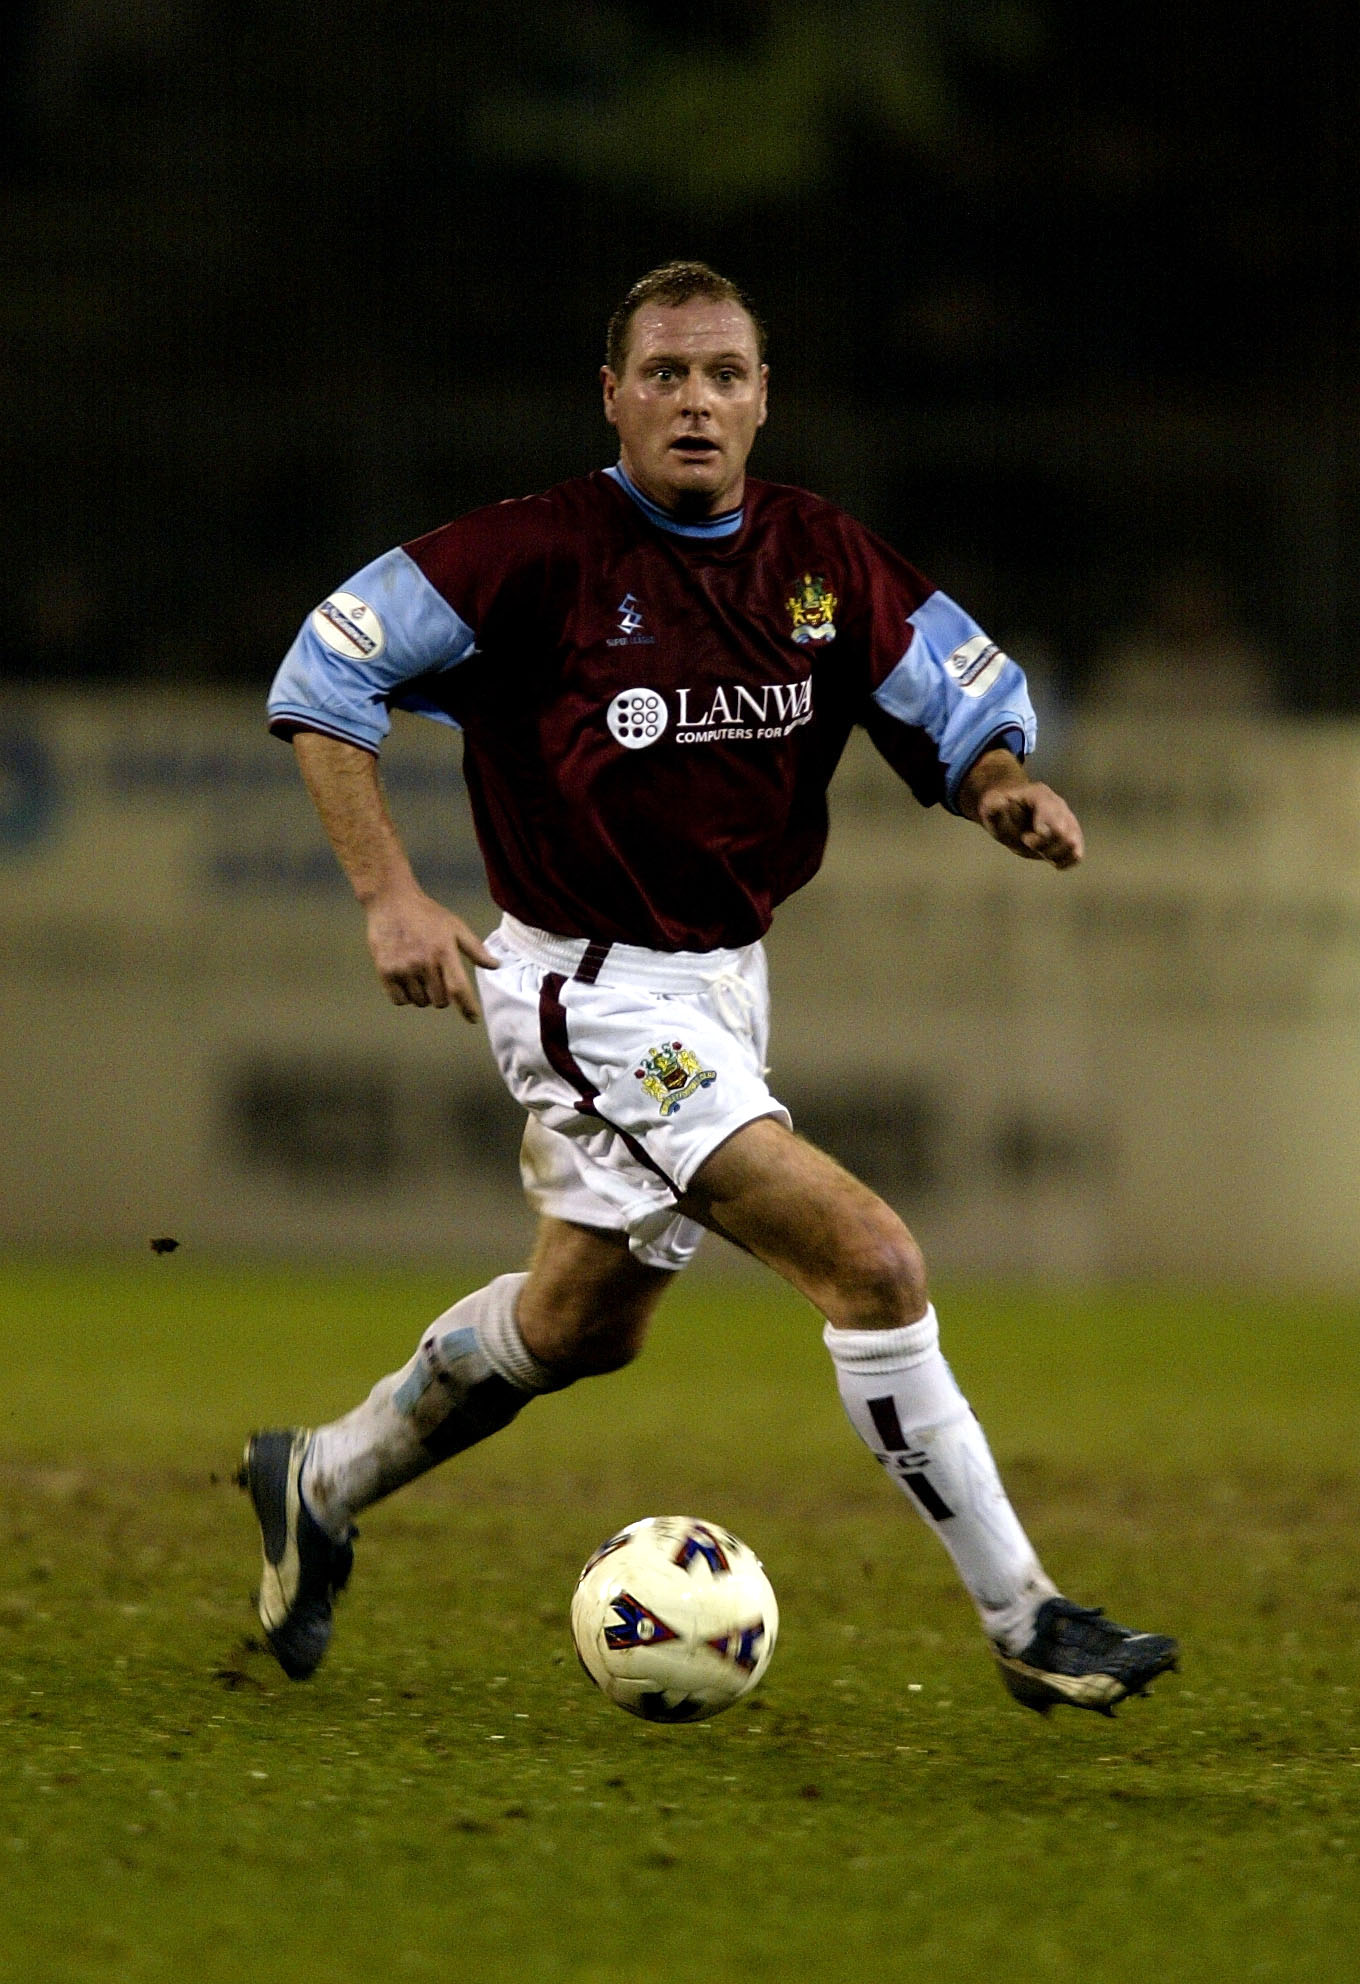 20 Mar 2002: Paul Gascoigne of Burnley in action during the Nationwide Division One match between Burnley and Bradford City at Turf Moor, Burnley, UK. DIGITAL IMAGE Mandatory Credit: Gary M. Prior/Getty Images